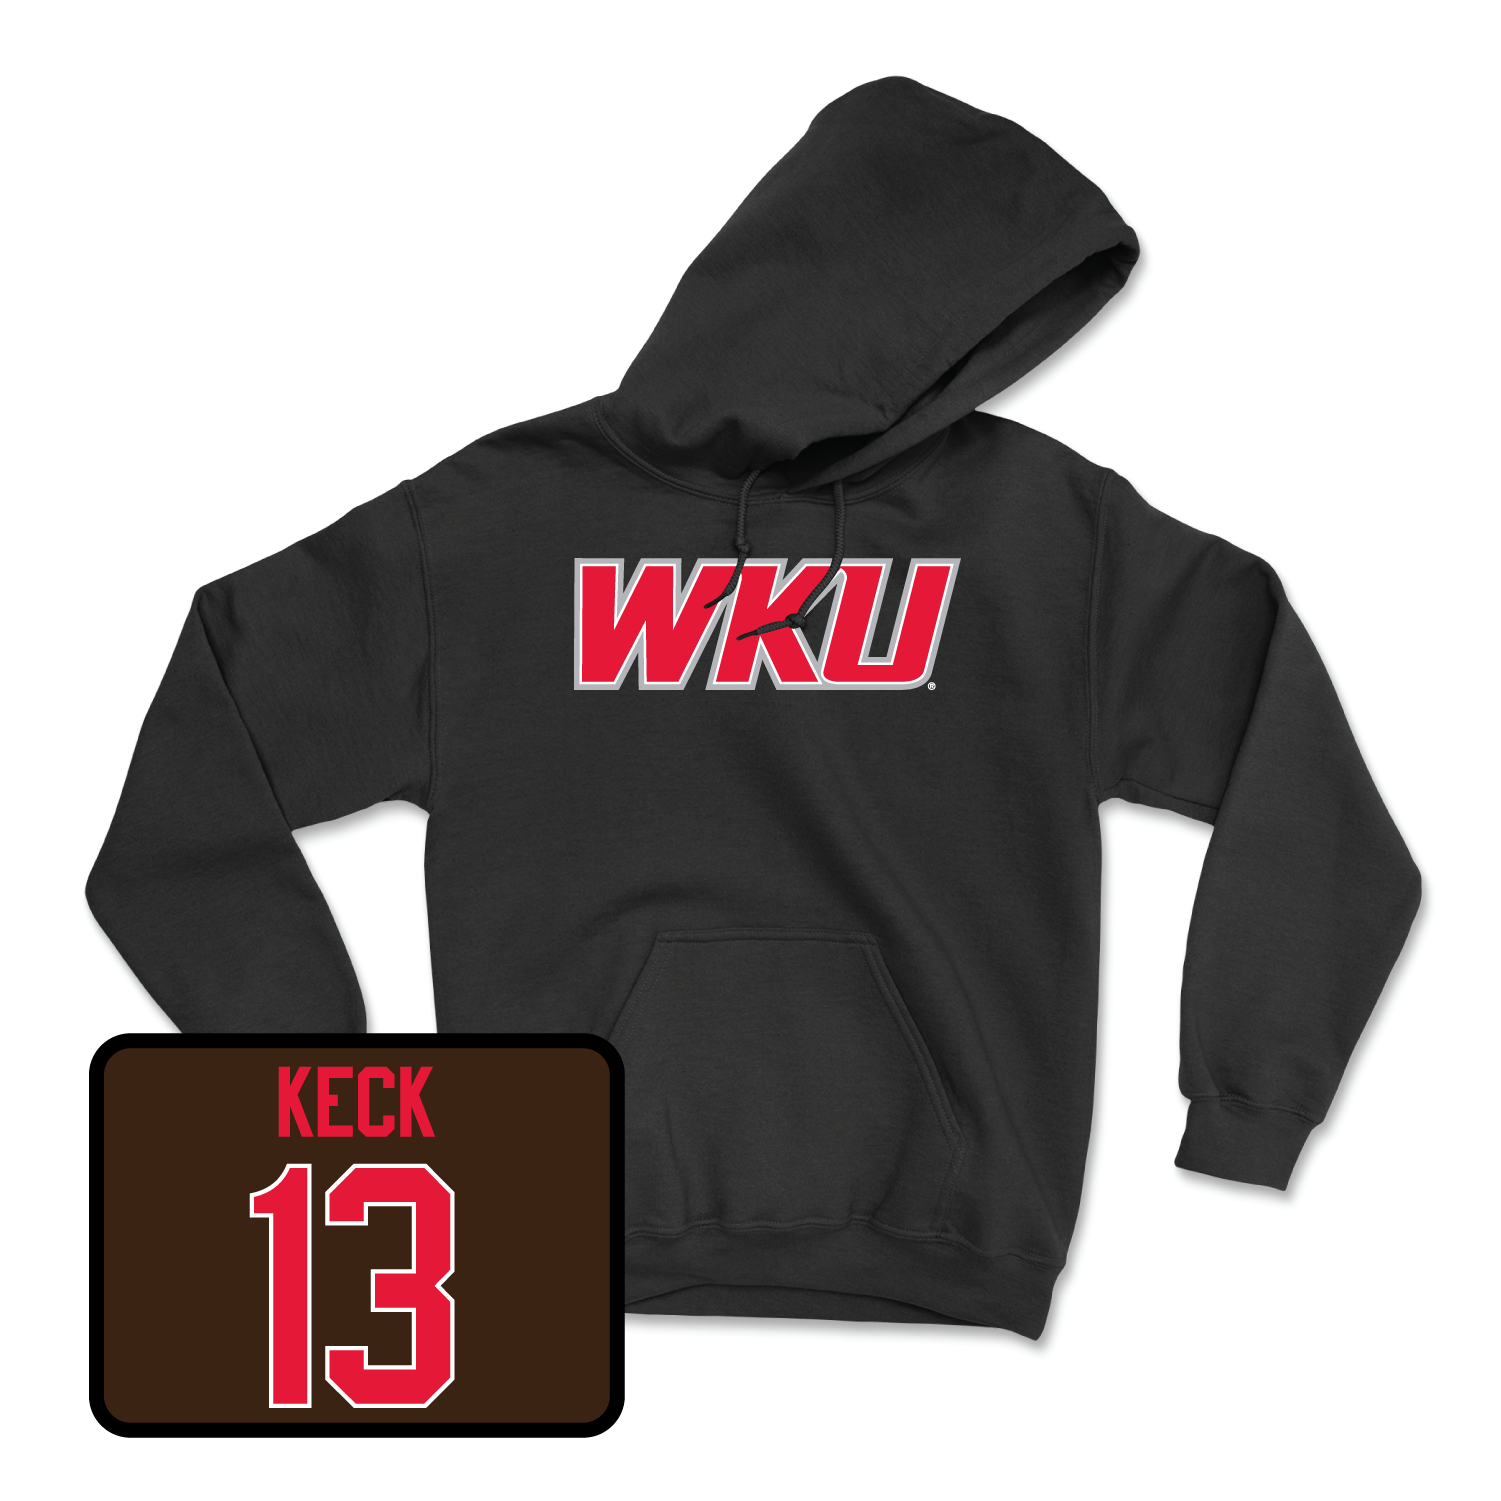 Black Women's Volleyball WKU Hoodie Youth Large / Shannon Keck | #13